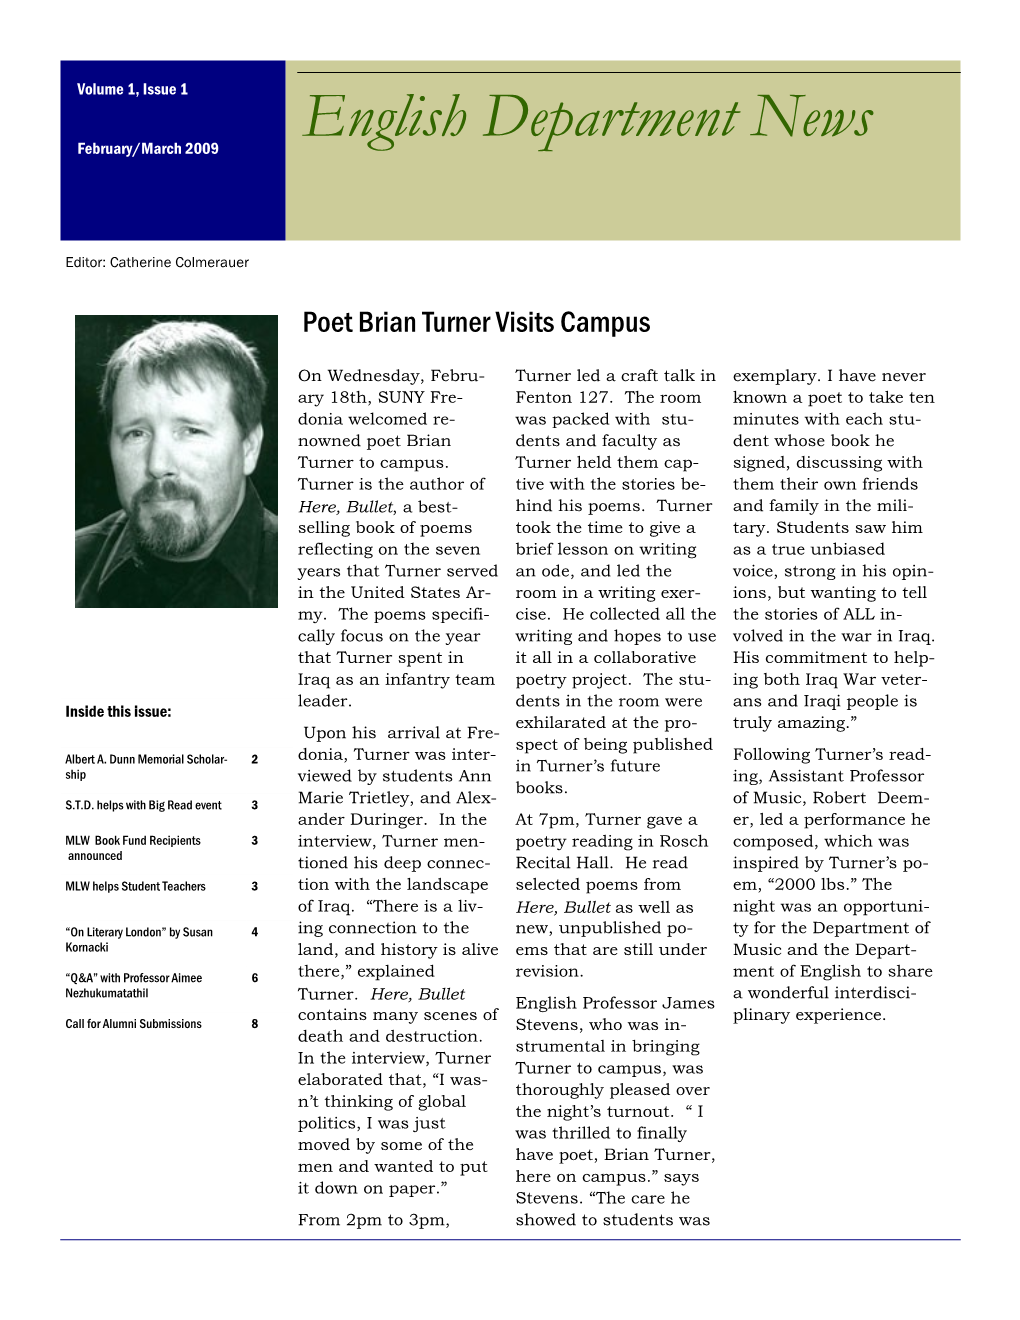 English Department News February/March 2009